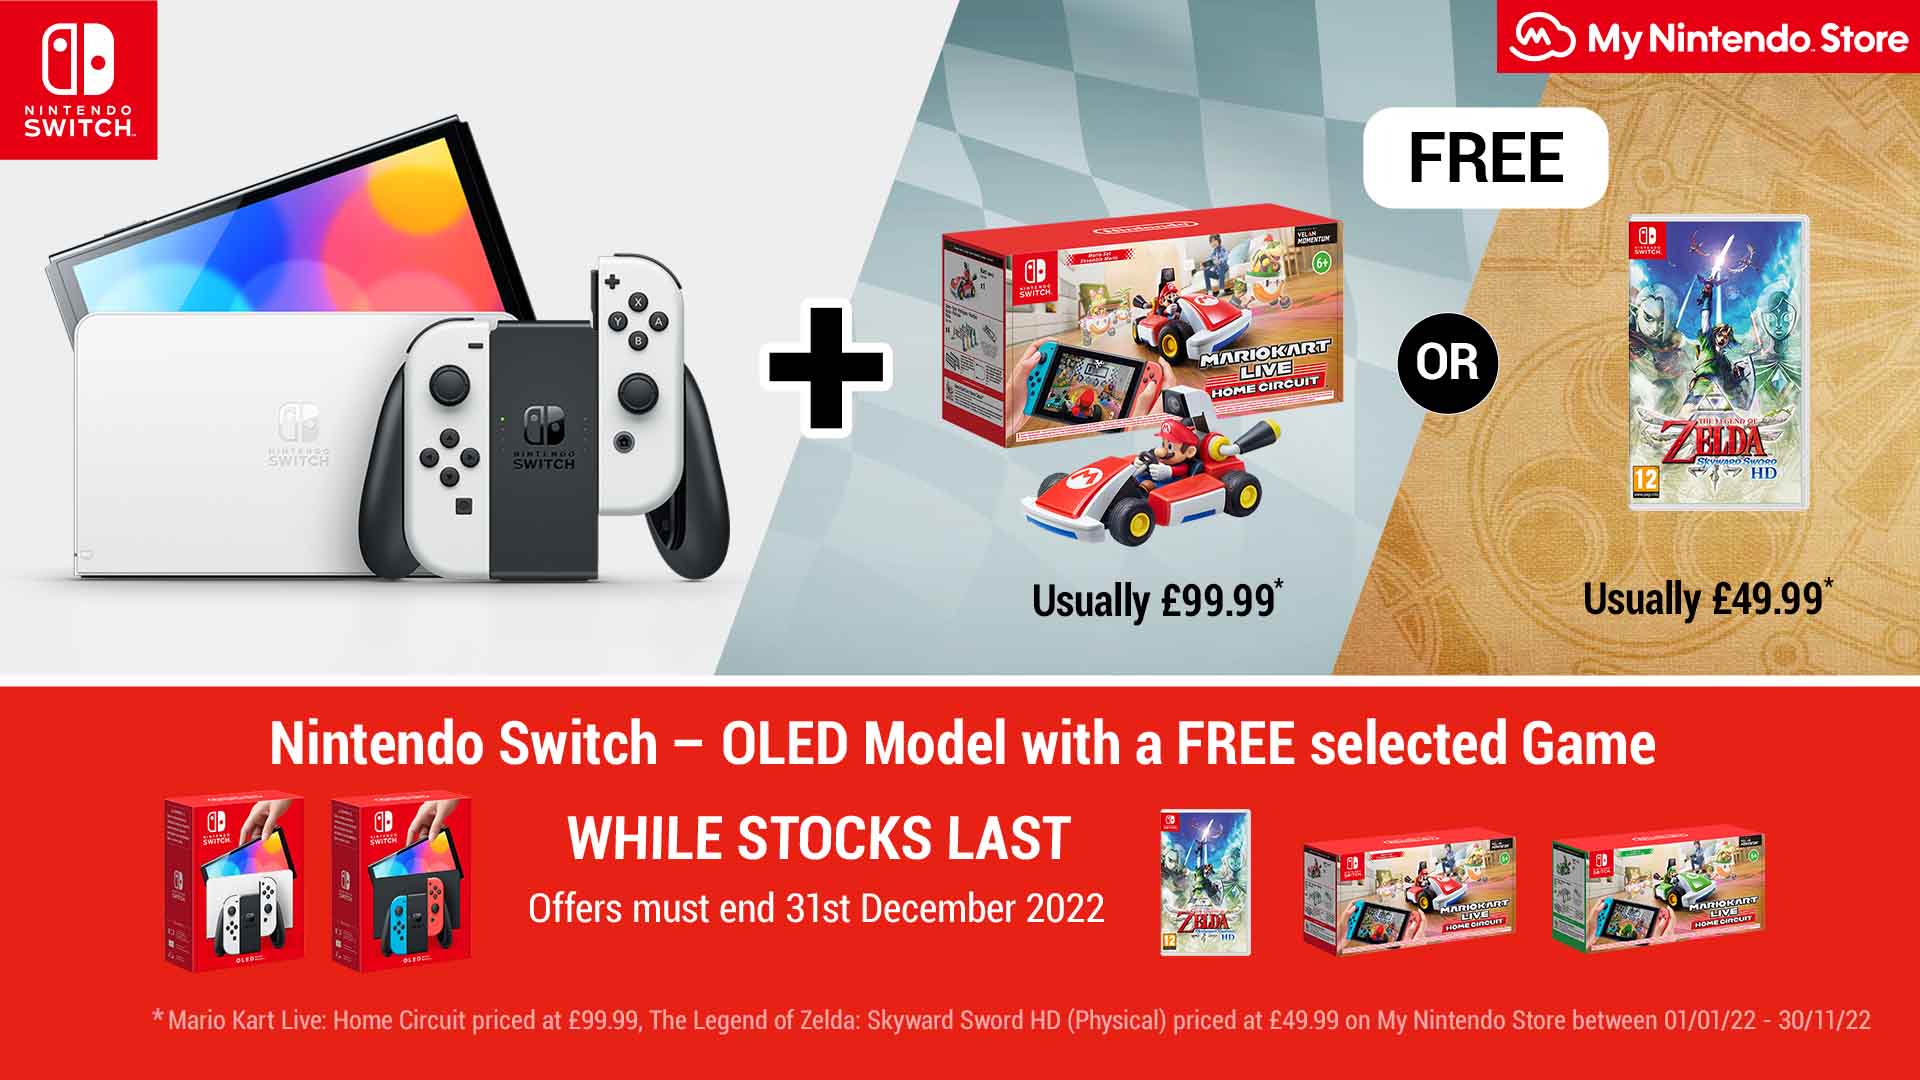 My Nintendo Store UK is giving away a free game with Switch OLED purchases